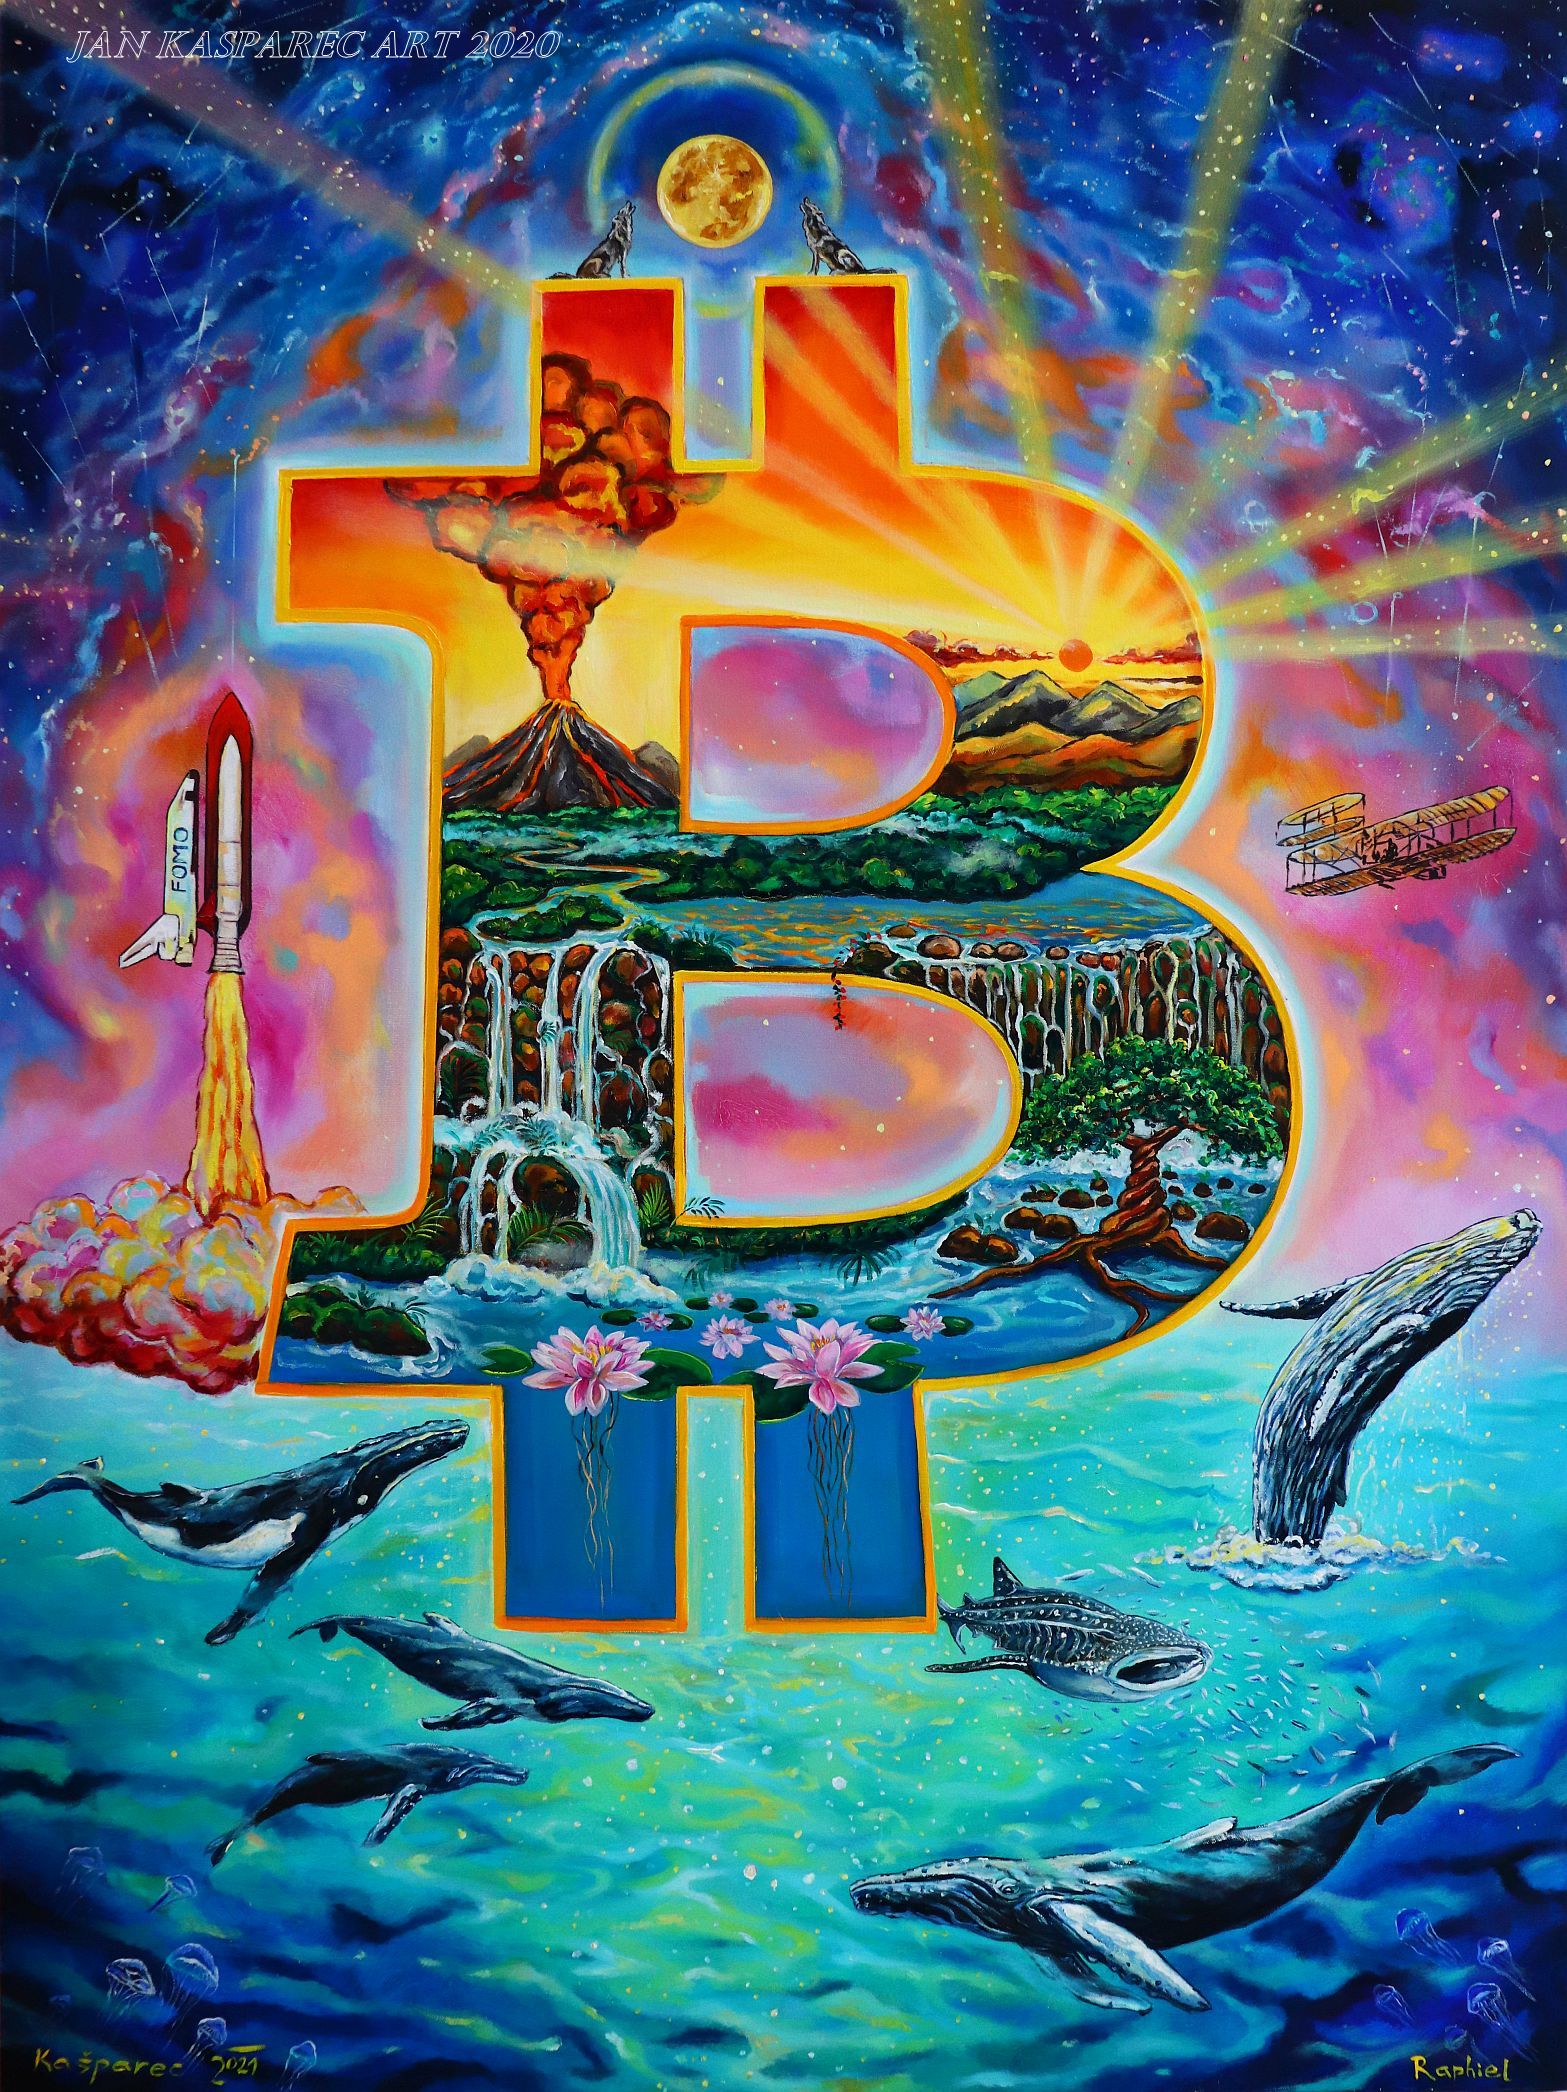 For the love of Bitcoin